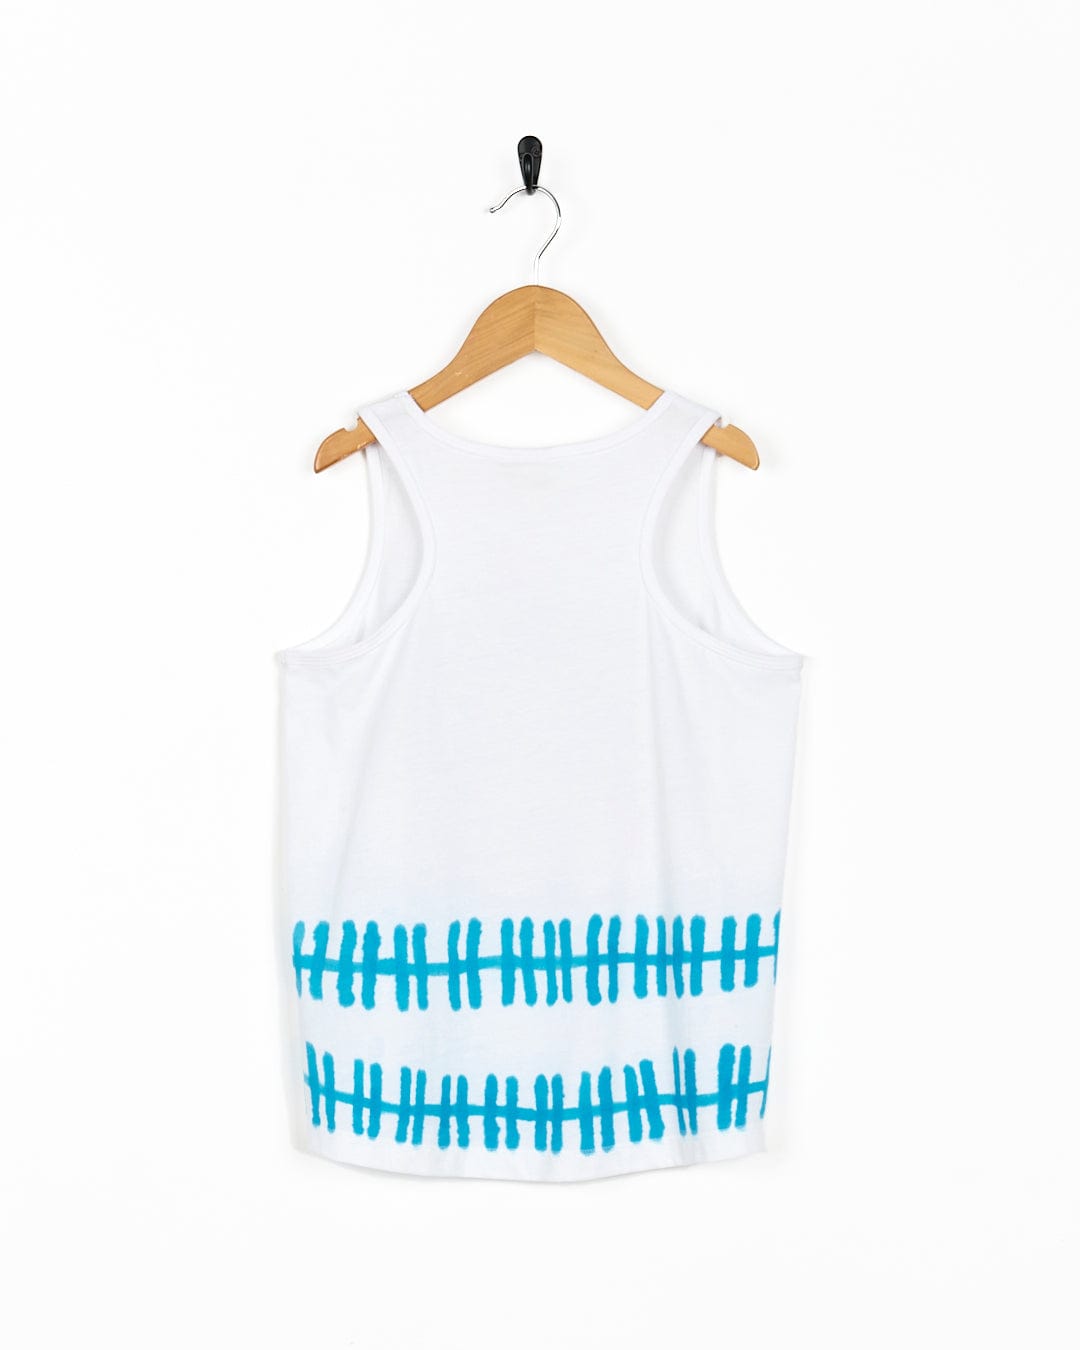 A white Tok Skate - Kids Vest - White with blue lines on it by Saltrock.